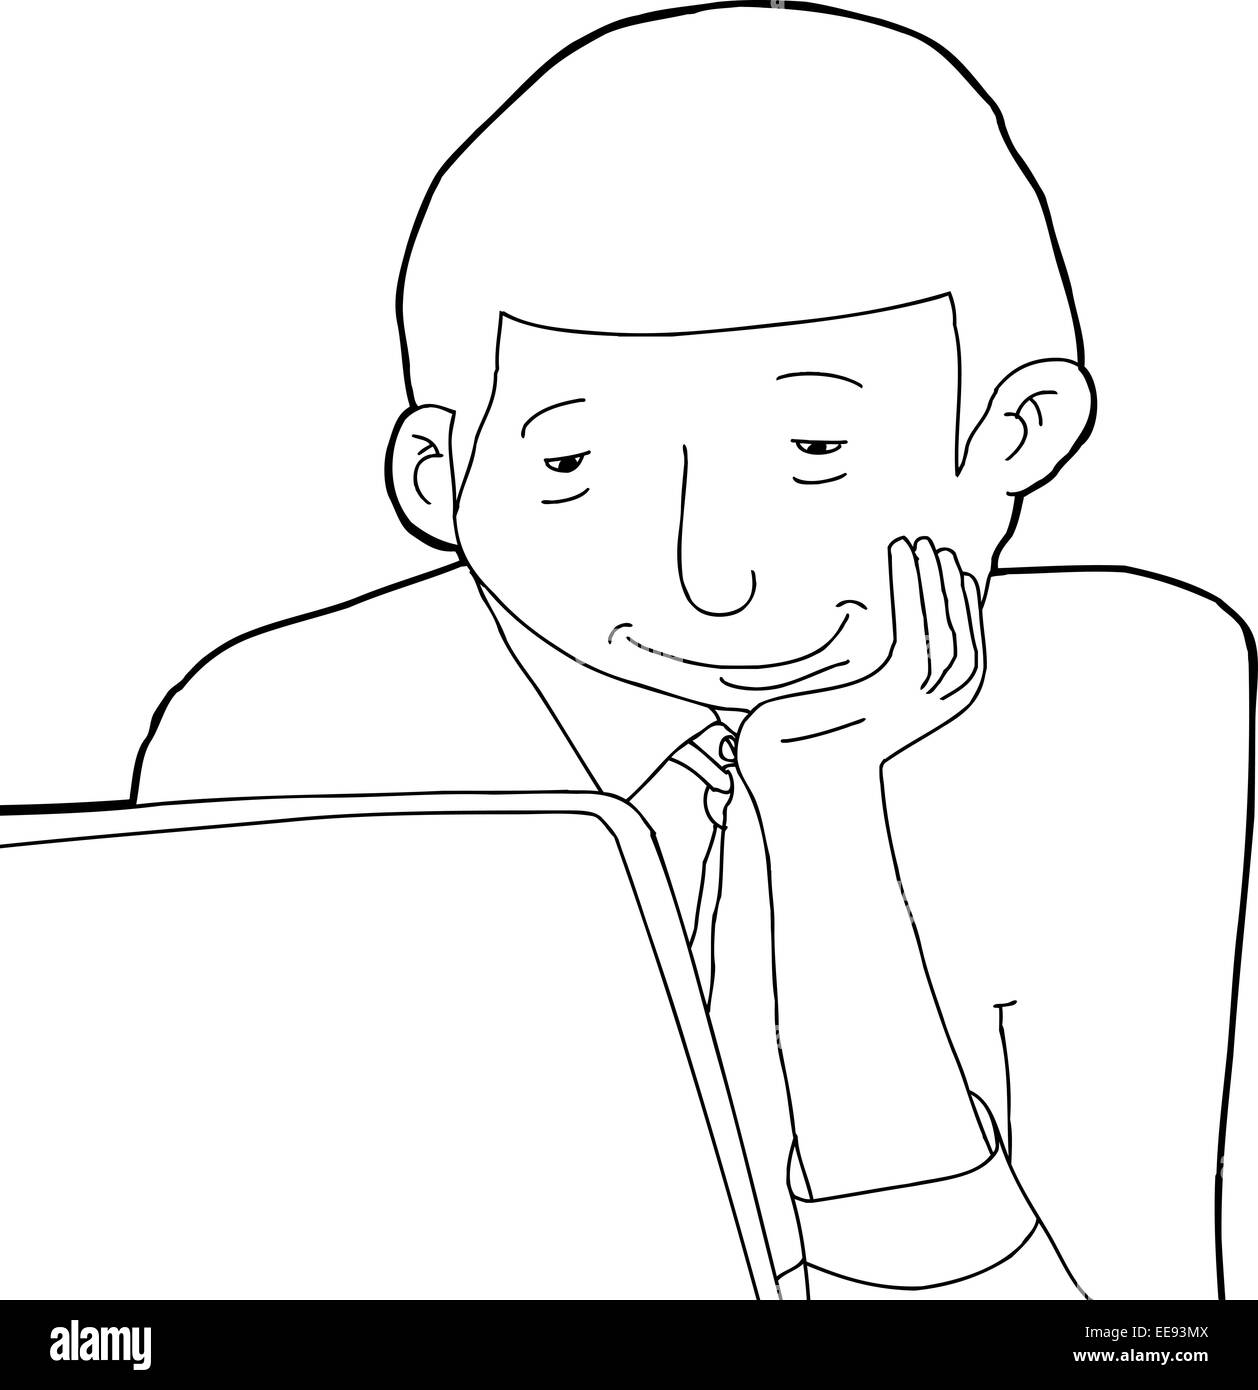 Outline of smiling Black man looking at his laptop computer Stock Photo